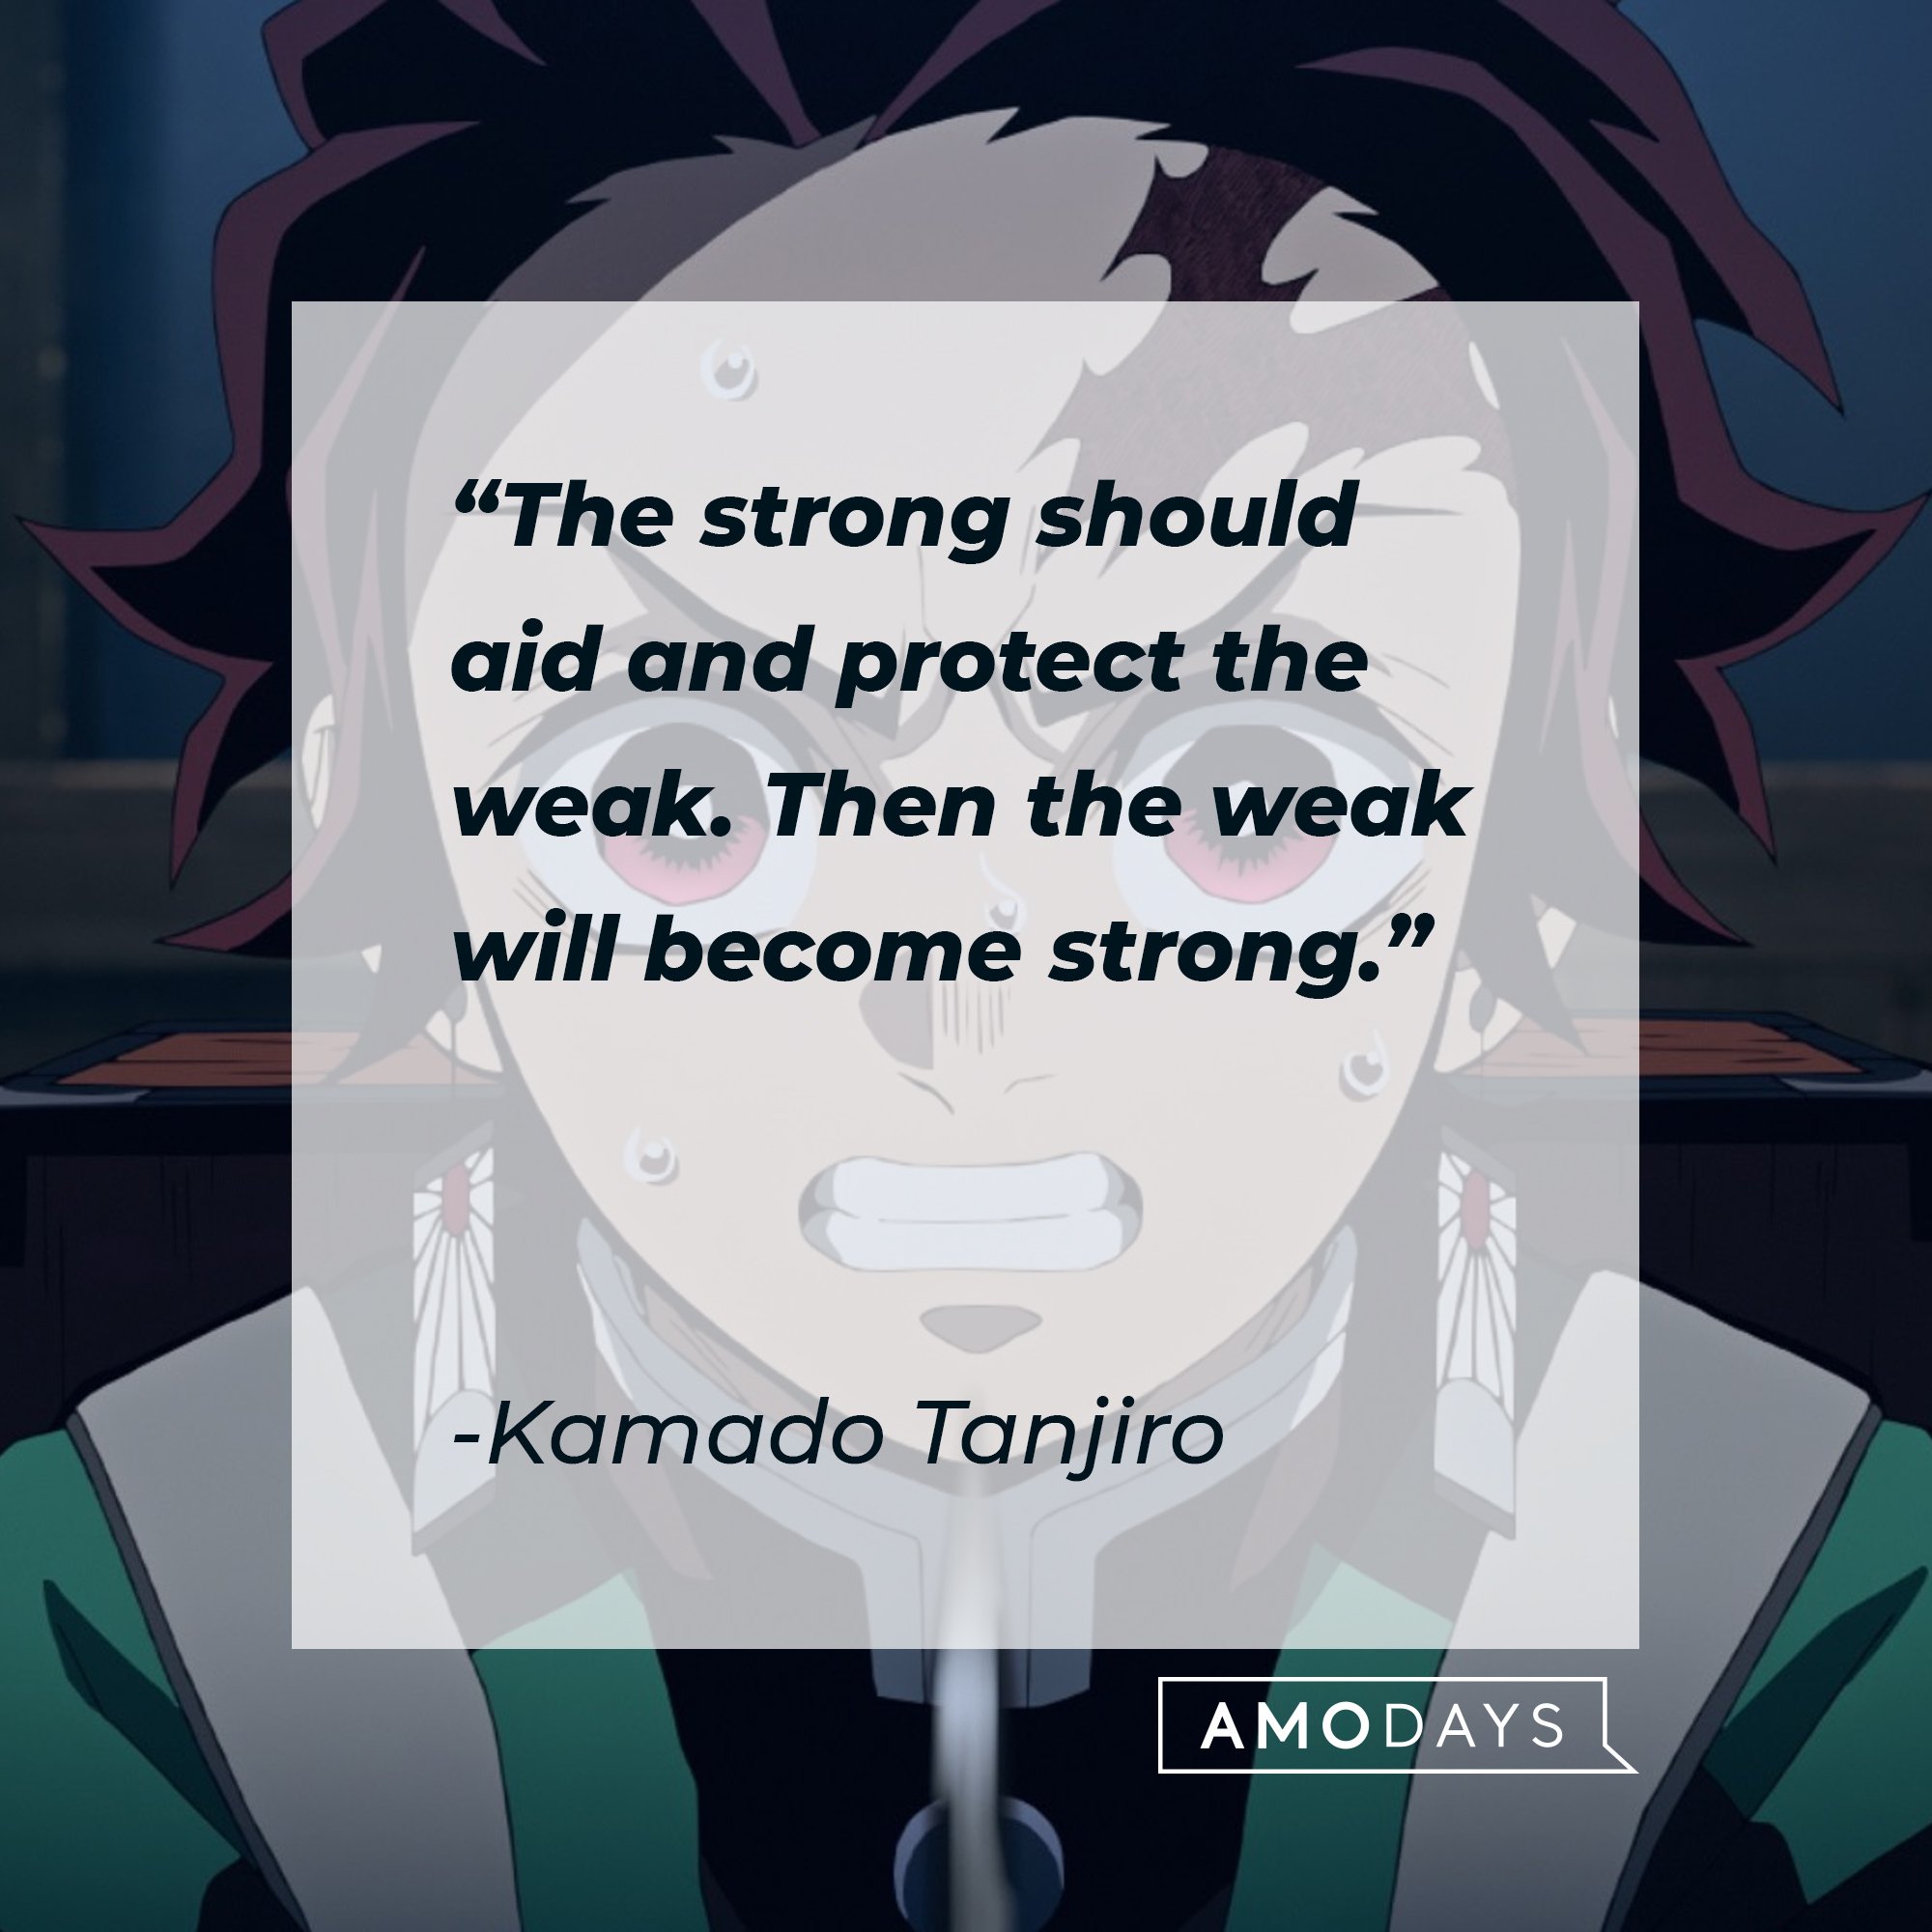 Kamado Tanjiro’s quote: "The strong should aid and protect the weak. Then the weak will become strong.” | Image: AmoDays